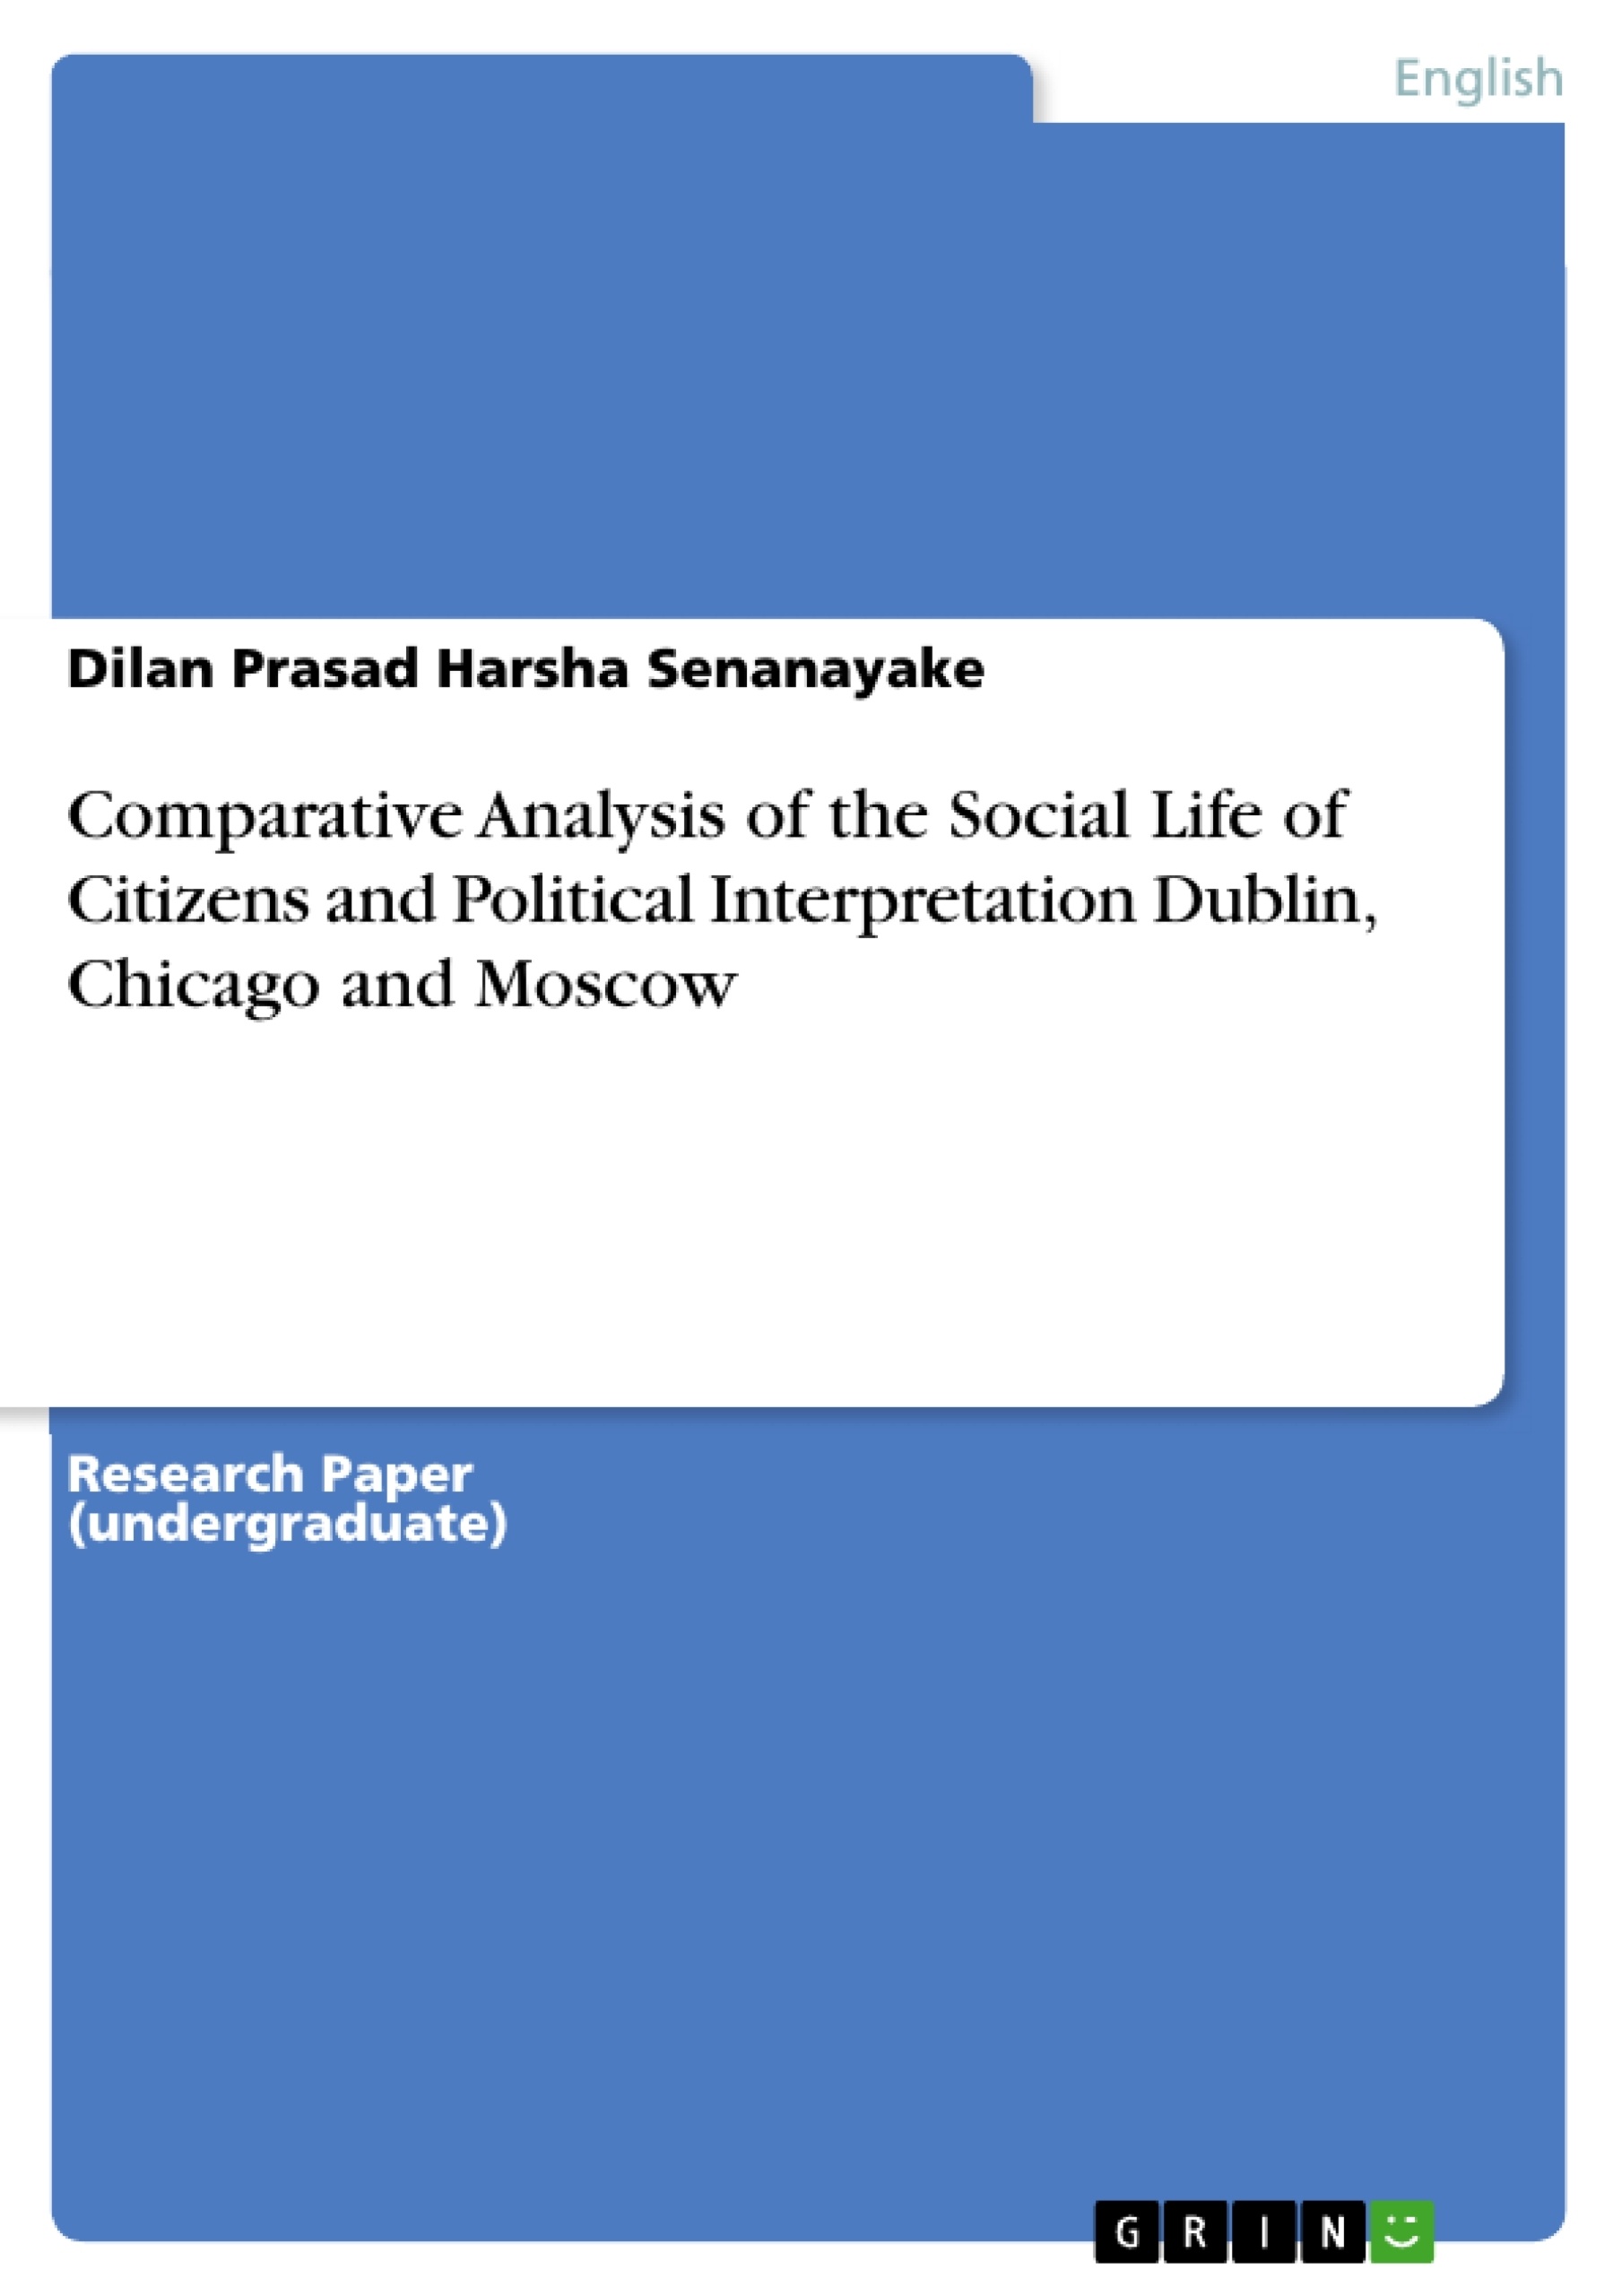 Titel: Comparative Analysis of the Social Life of Citizens and Political Interpretation Dublin, Chicago and Moscow